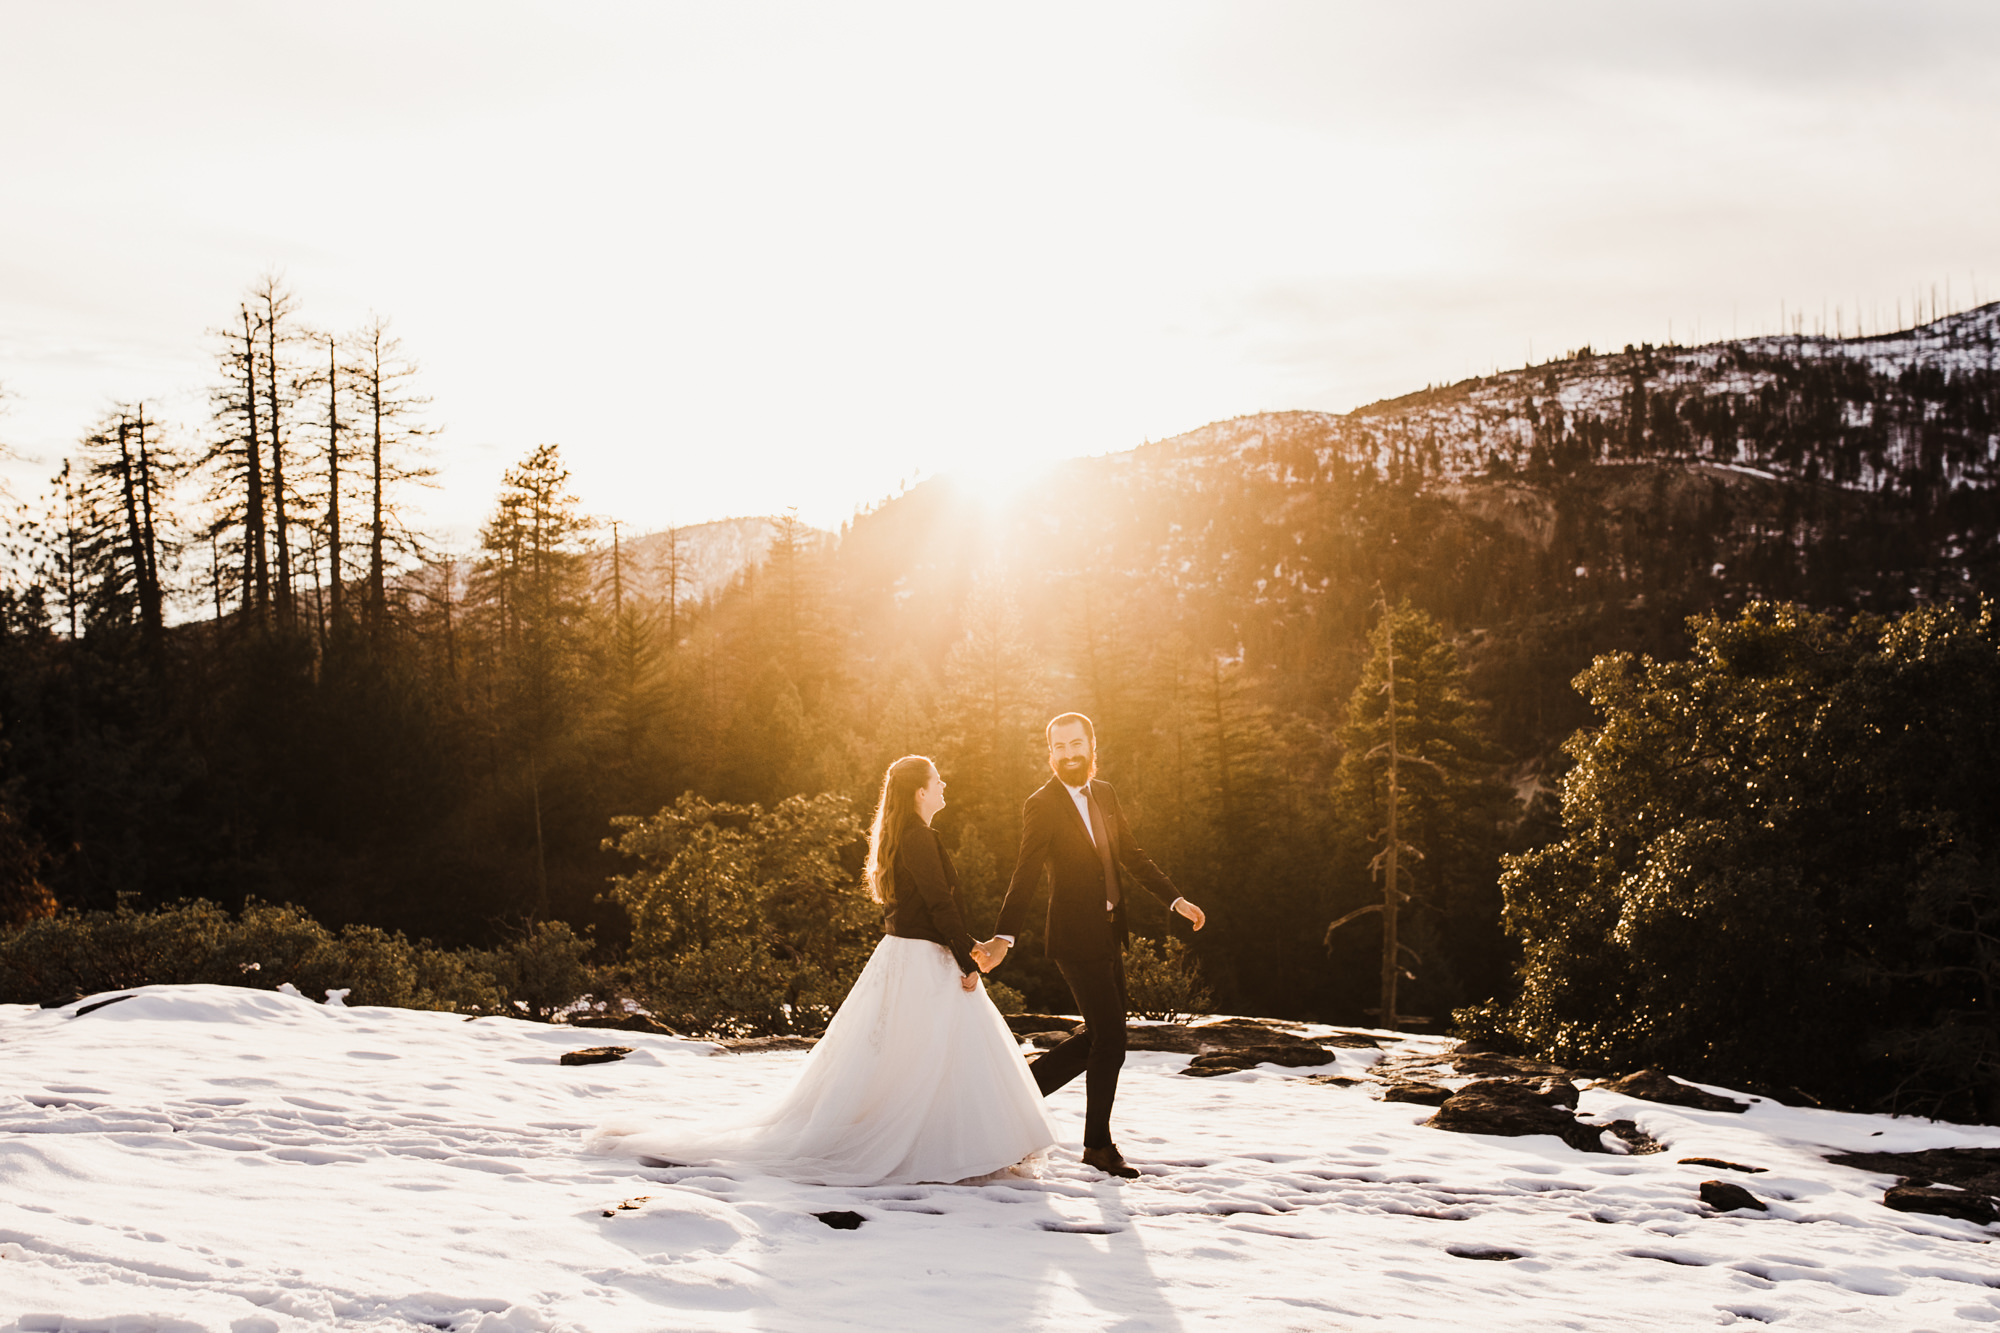 snowy elopement wedding in yosemite national park | The Hearnes Adventure Photography